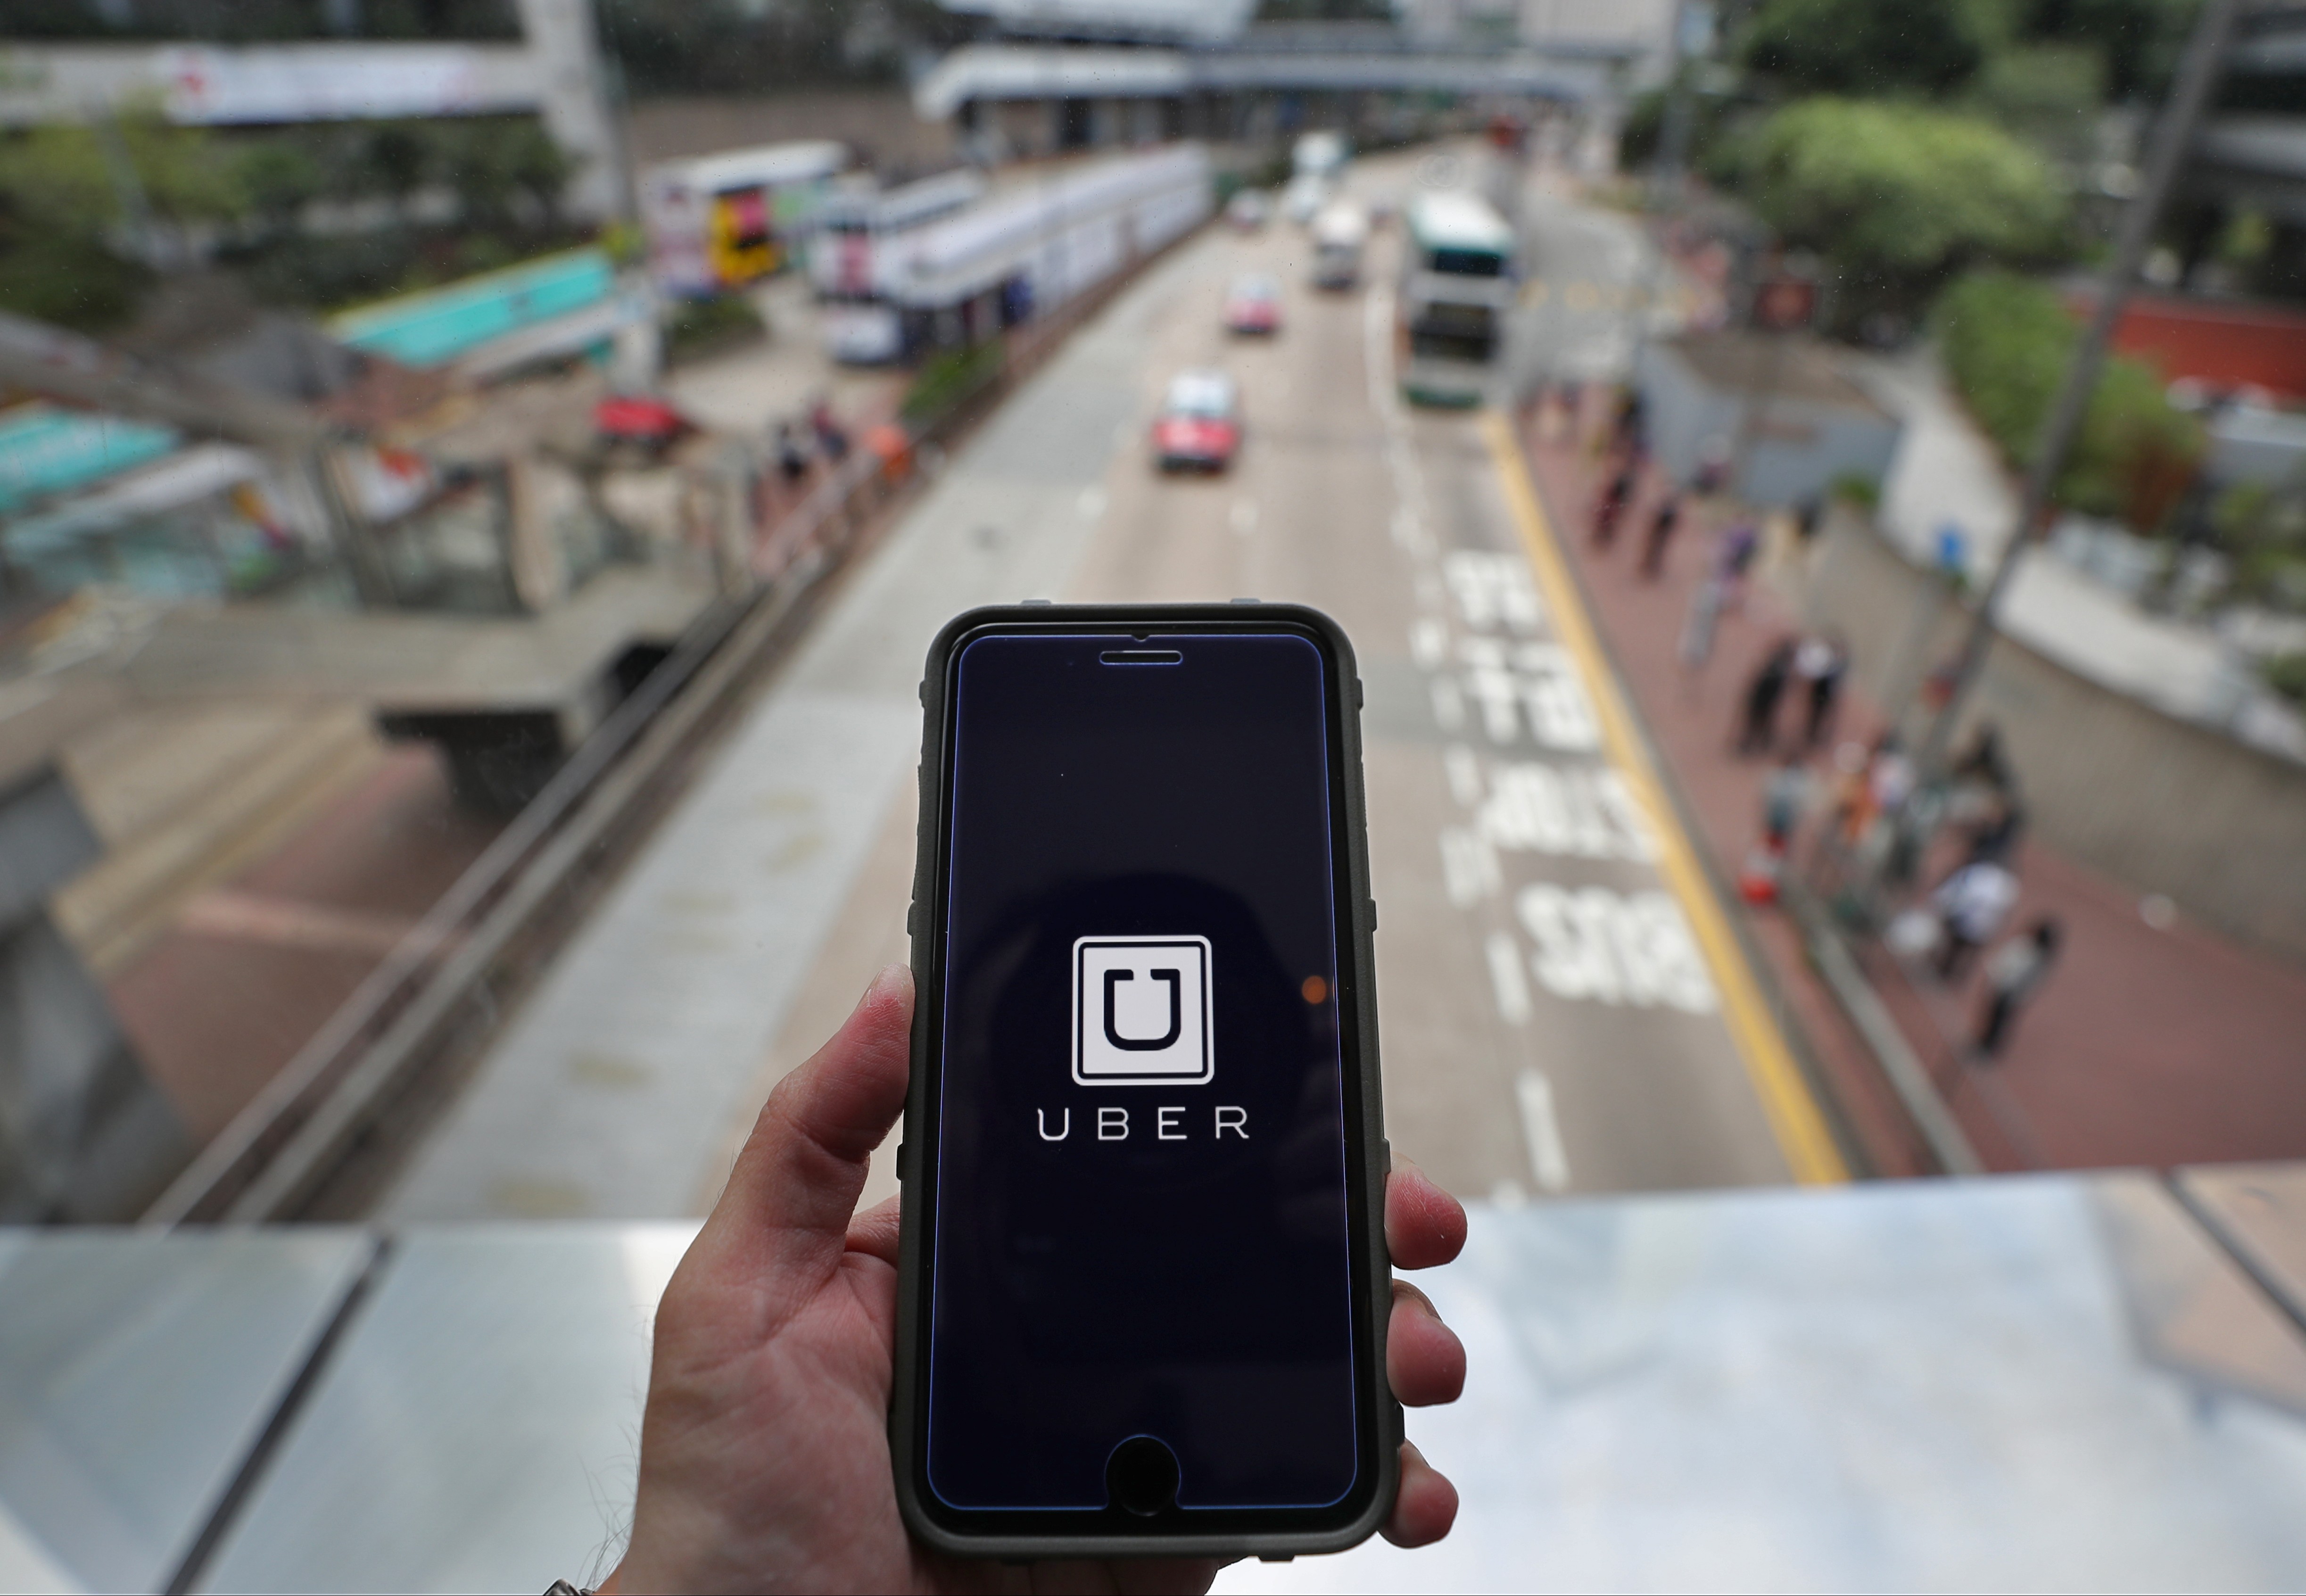 Uber claims to have more than 30,000 registered drivers in Hong Kong. Photo: Winson Wong